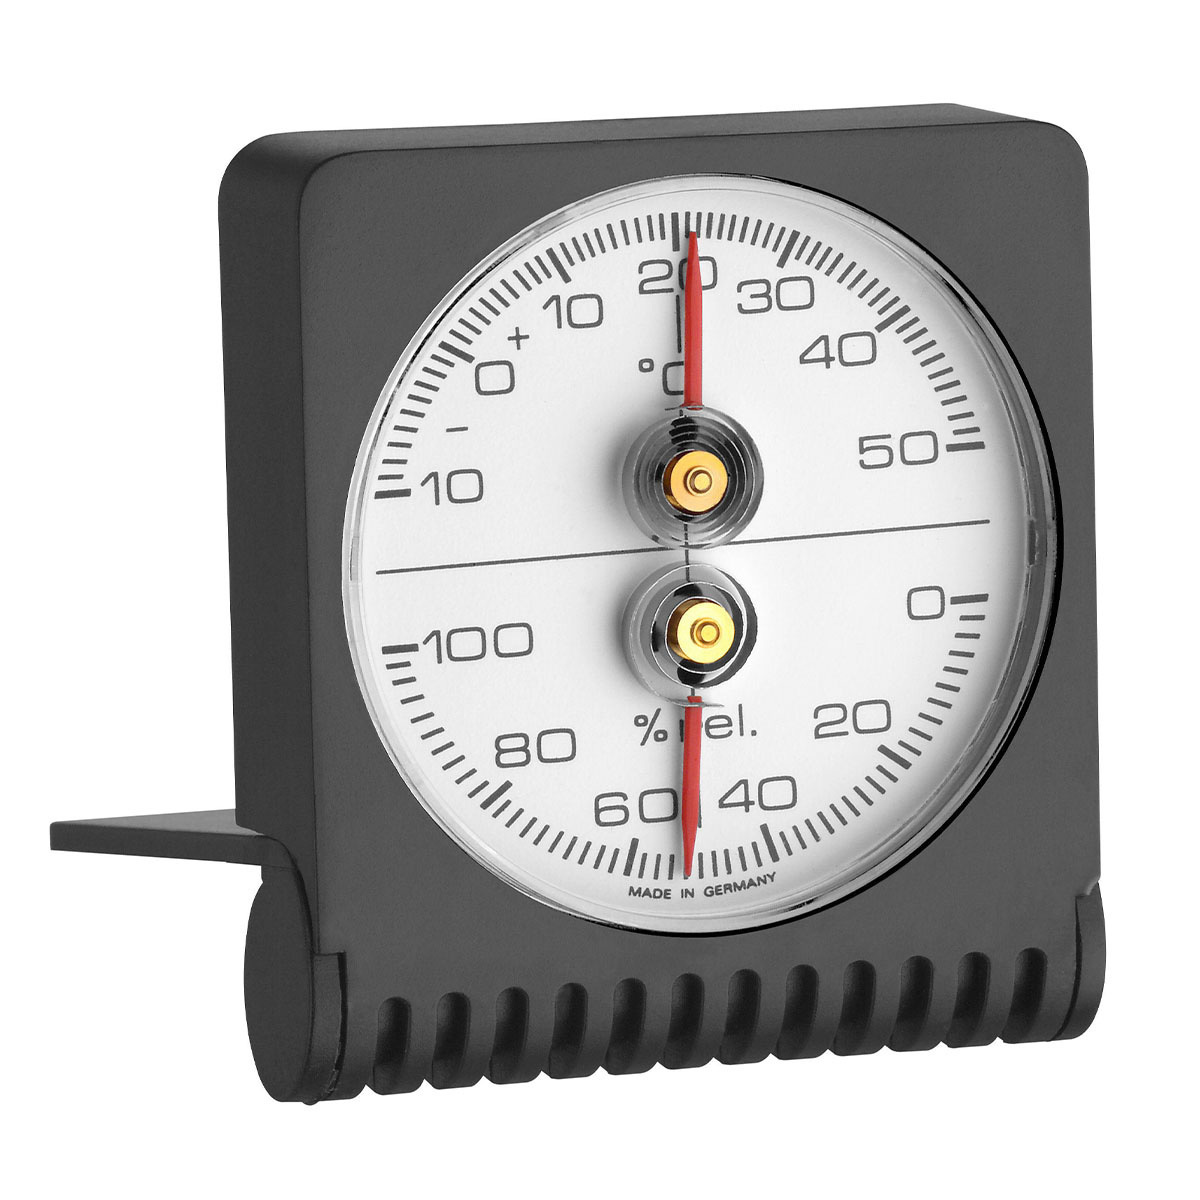 Analogue thermo-hygrometer with brass ring